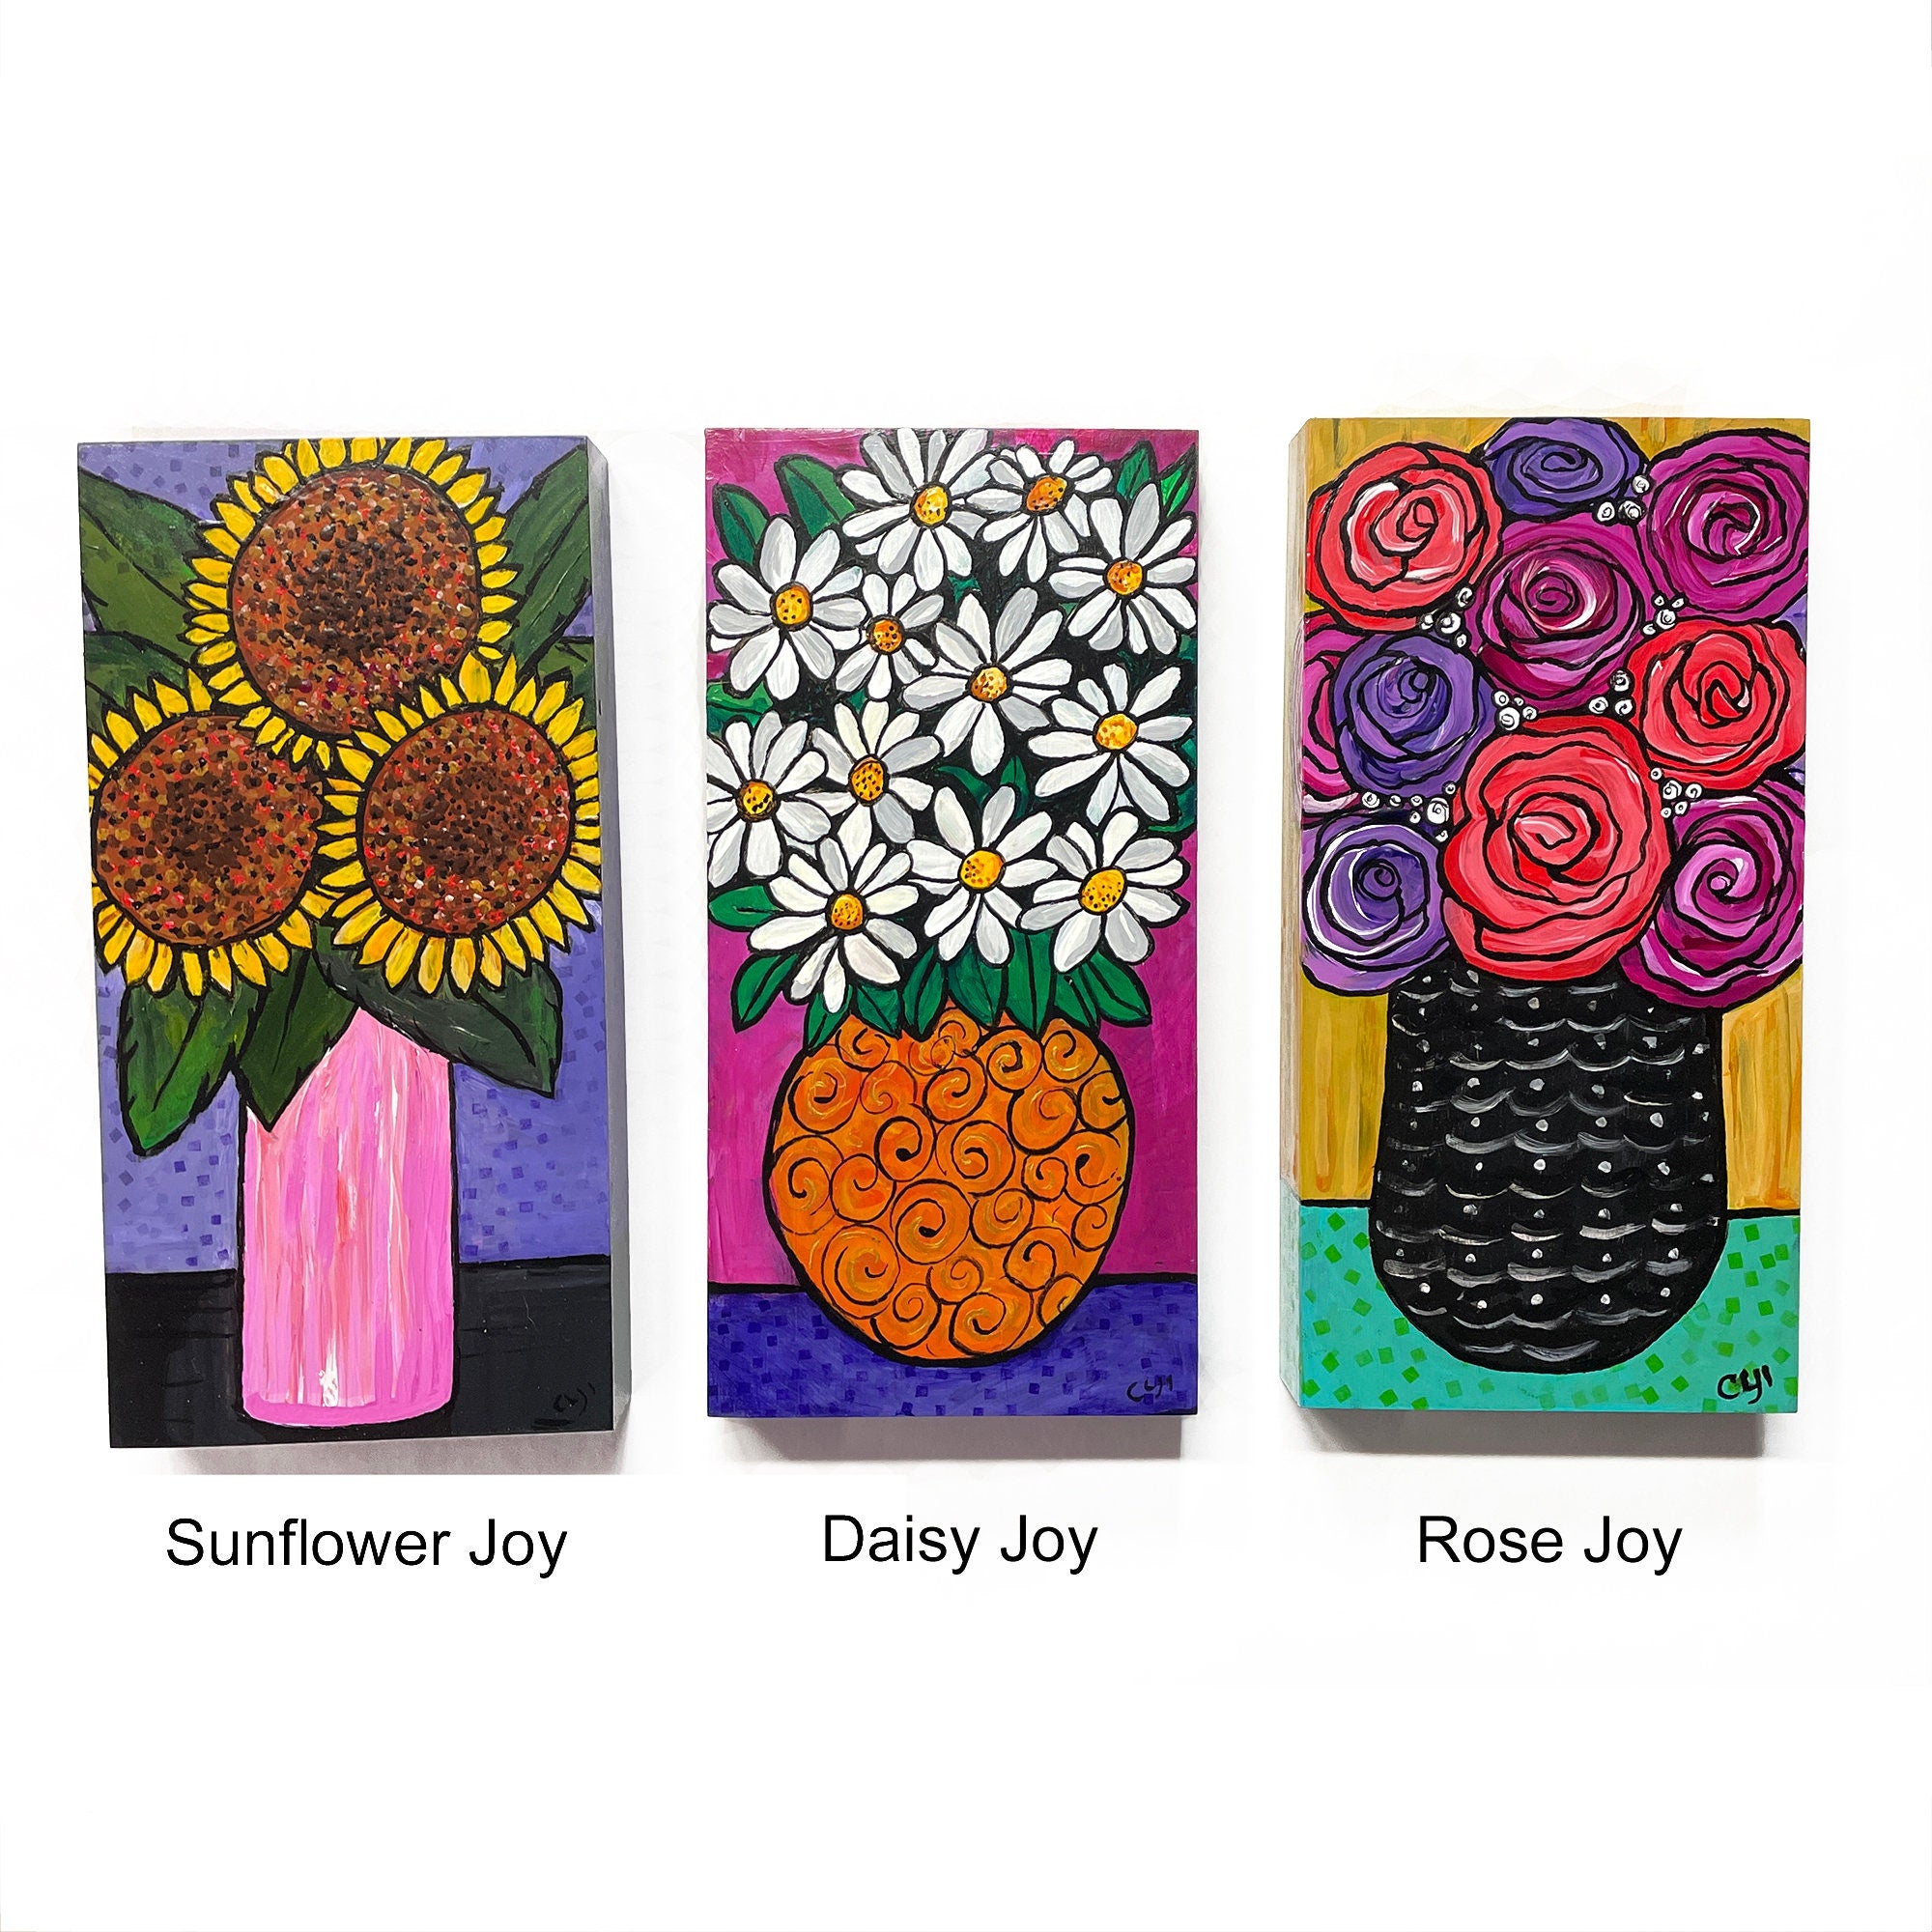 Whimsical Daisy Still Life Painting - Original Flower Art - Cheerful Happy Floral Art - Bold Colors - 6x12 Inches